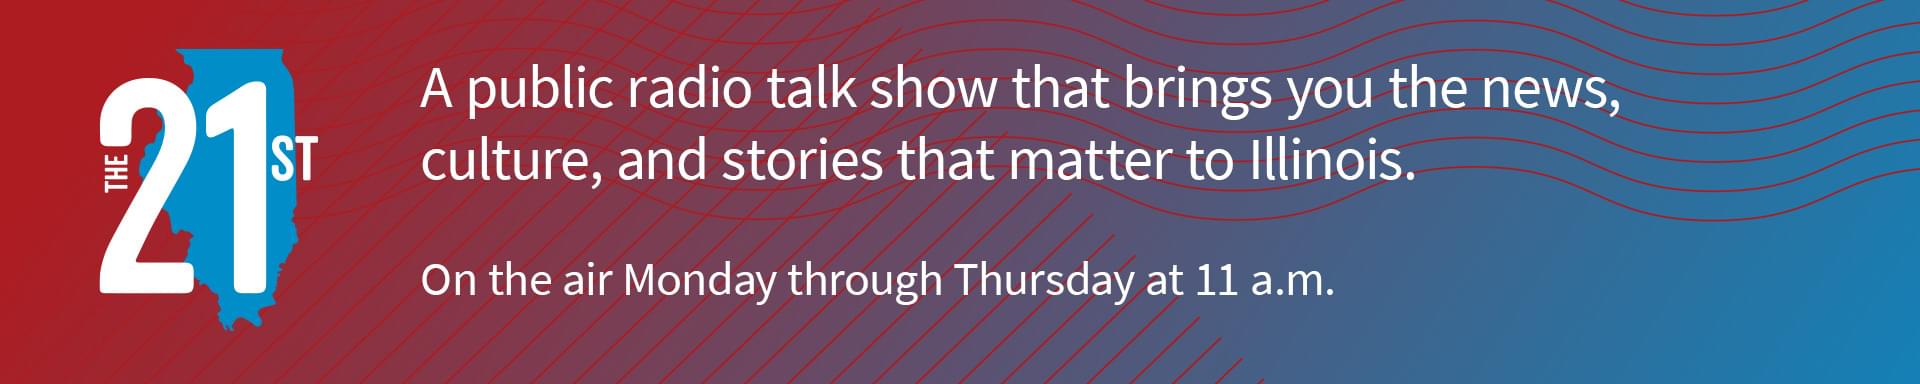 The 21st: A public radio talk show that brings you the news, culture, and stories that matter to Illinois. On the air Monday through Thursday at 11 a.m.